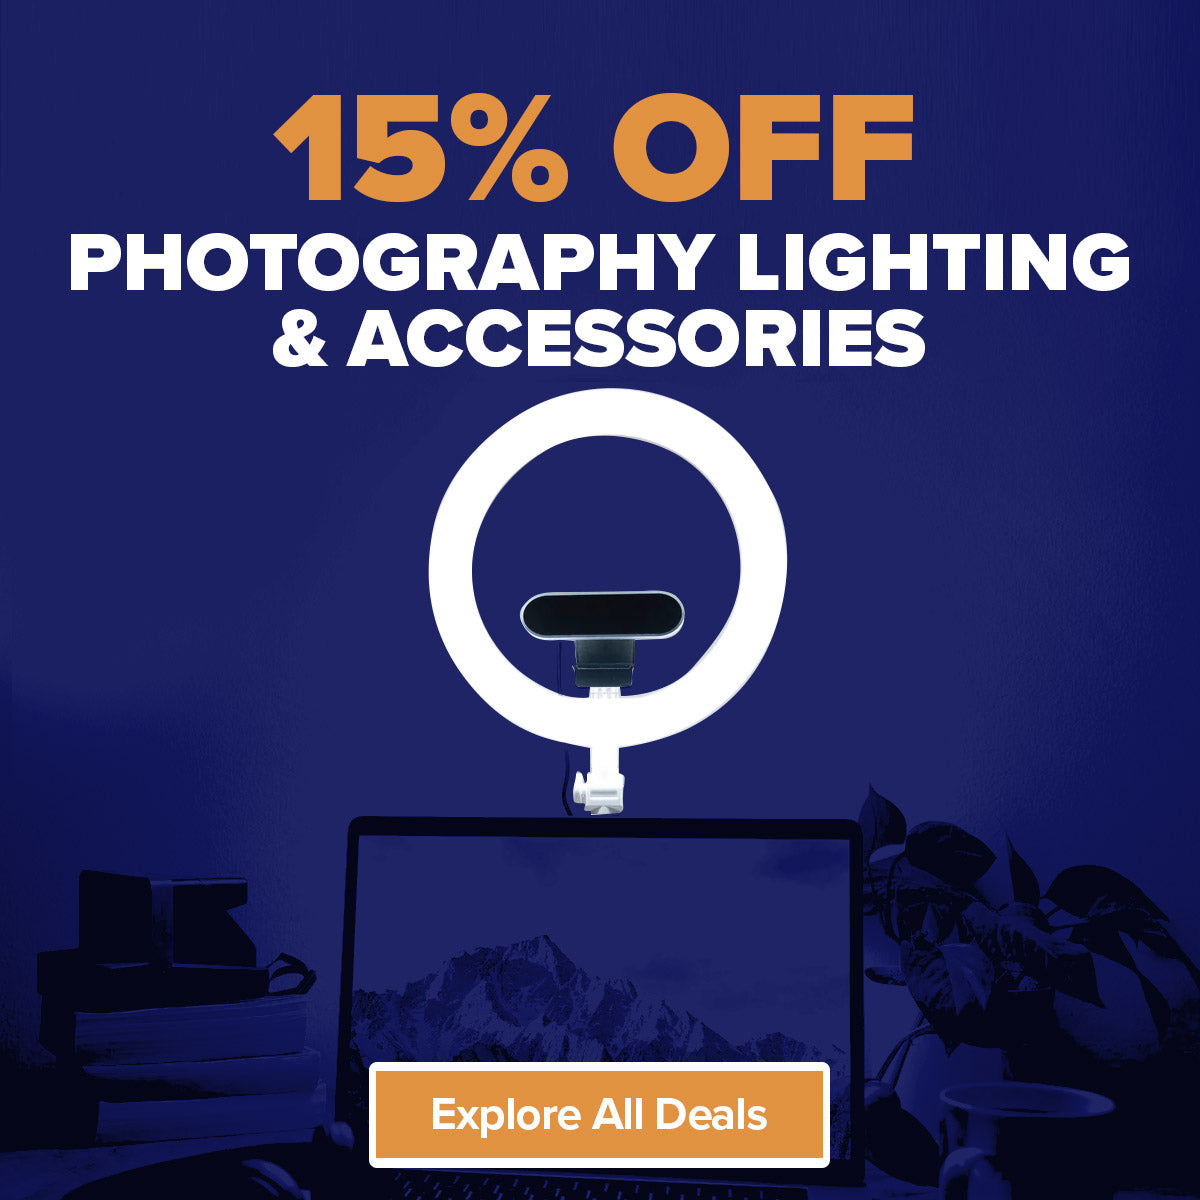 Save 15% off Photography Lighting and Accessories with Maplin's January Sale deals!